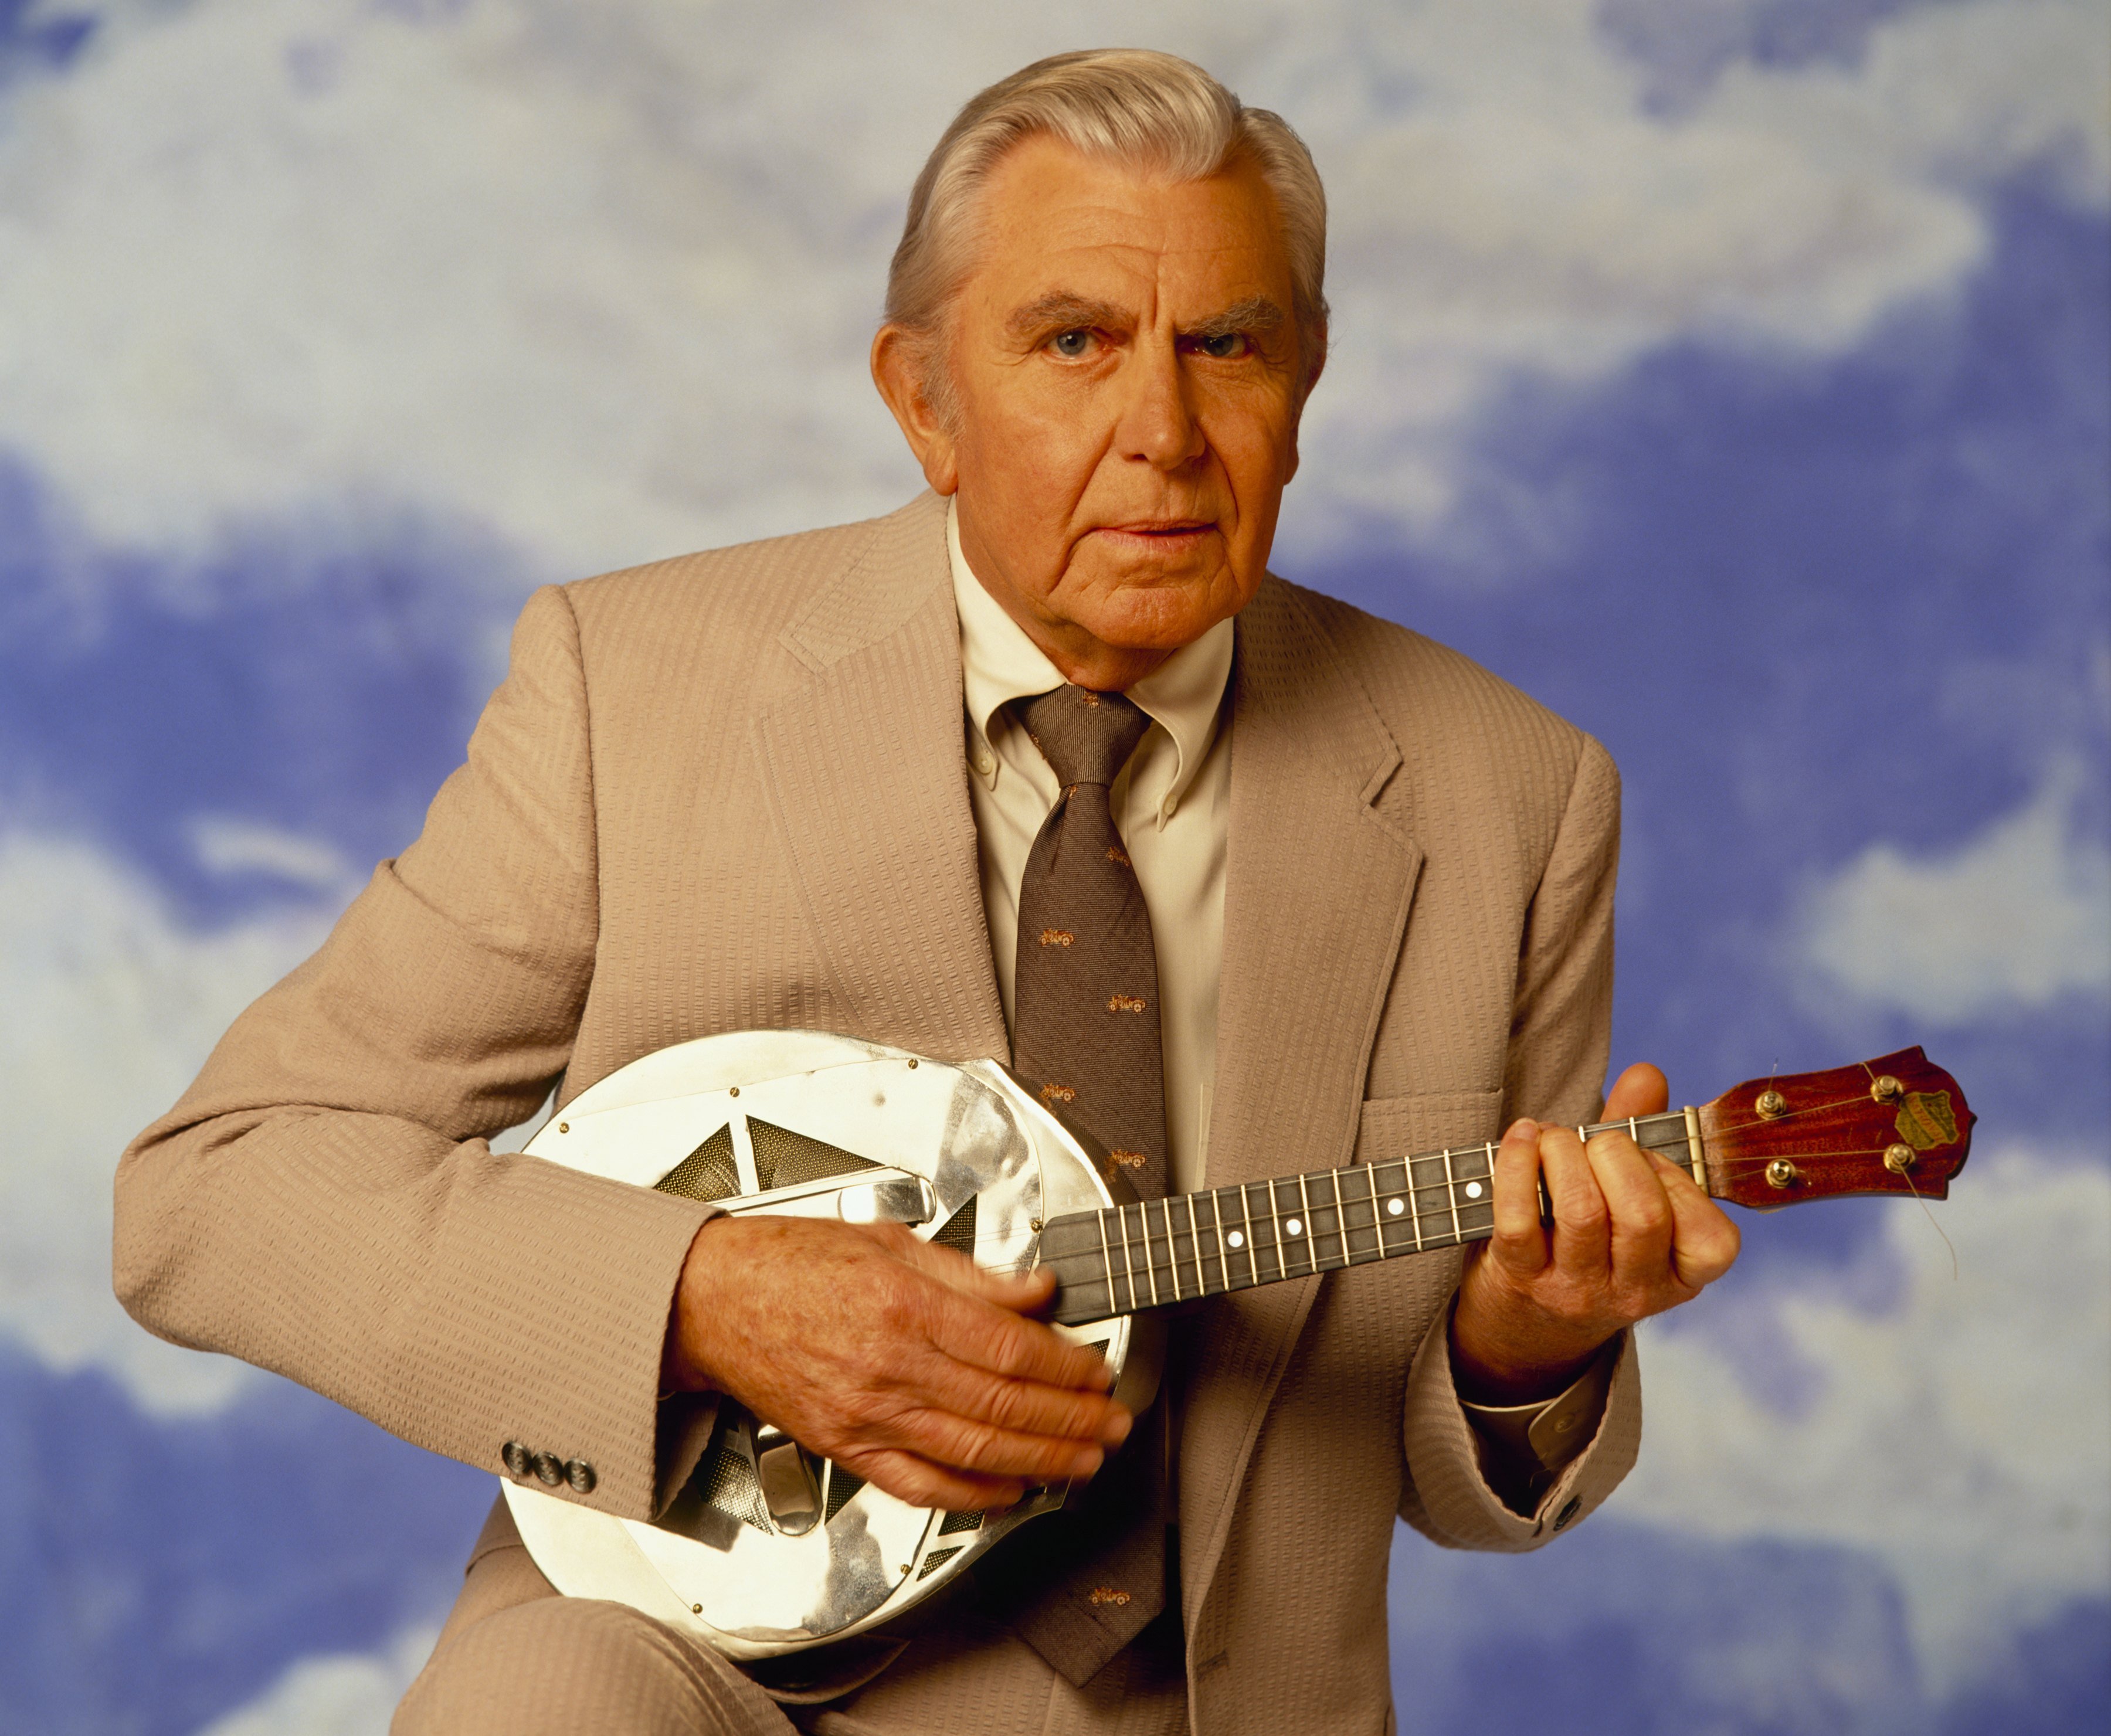 Andy Griffith as 'Matlock' holds a small guitar in 1992